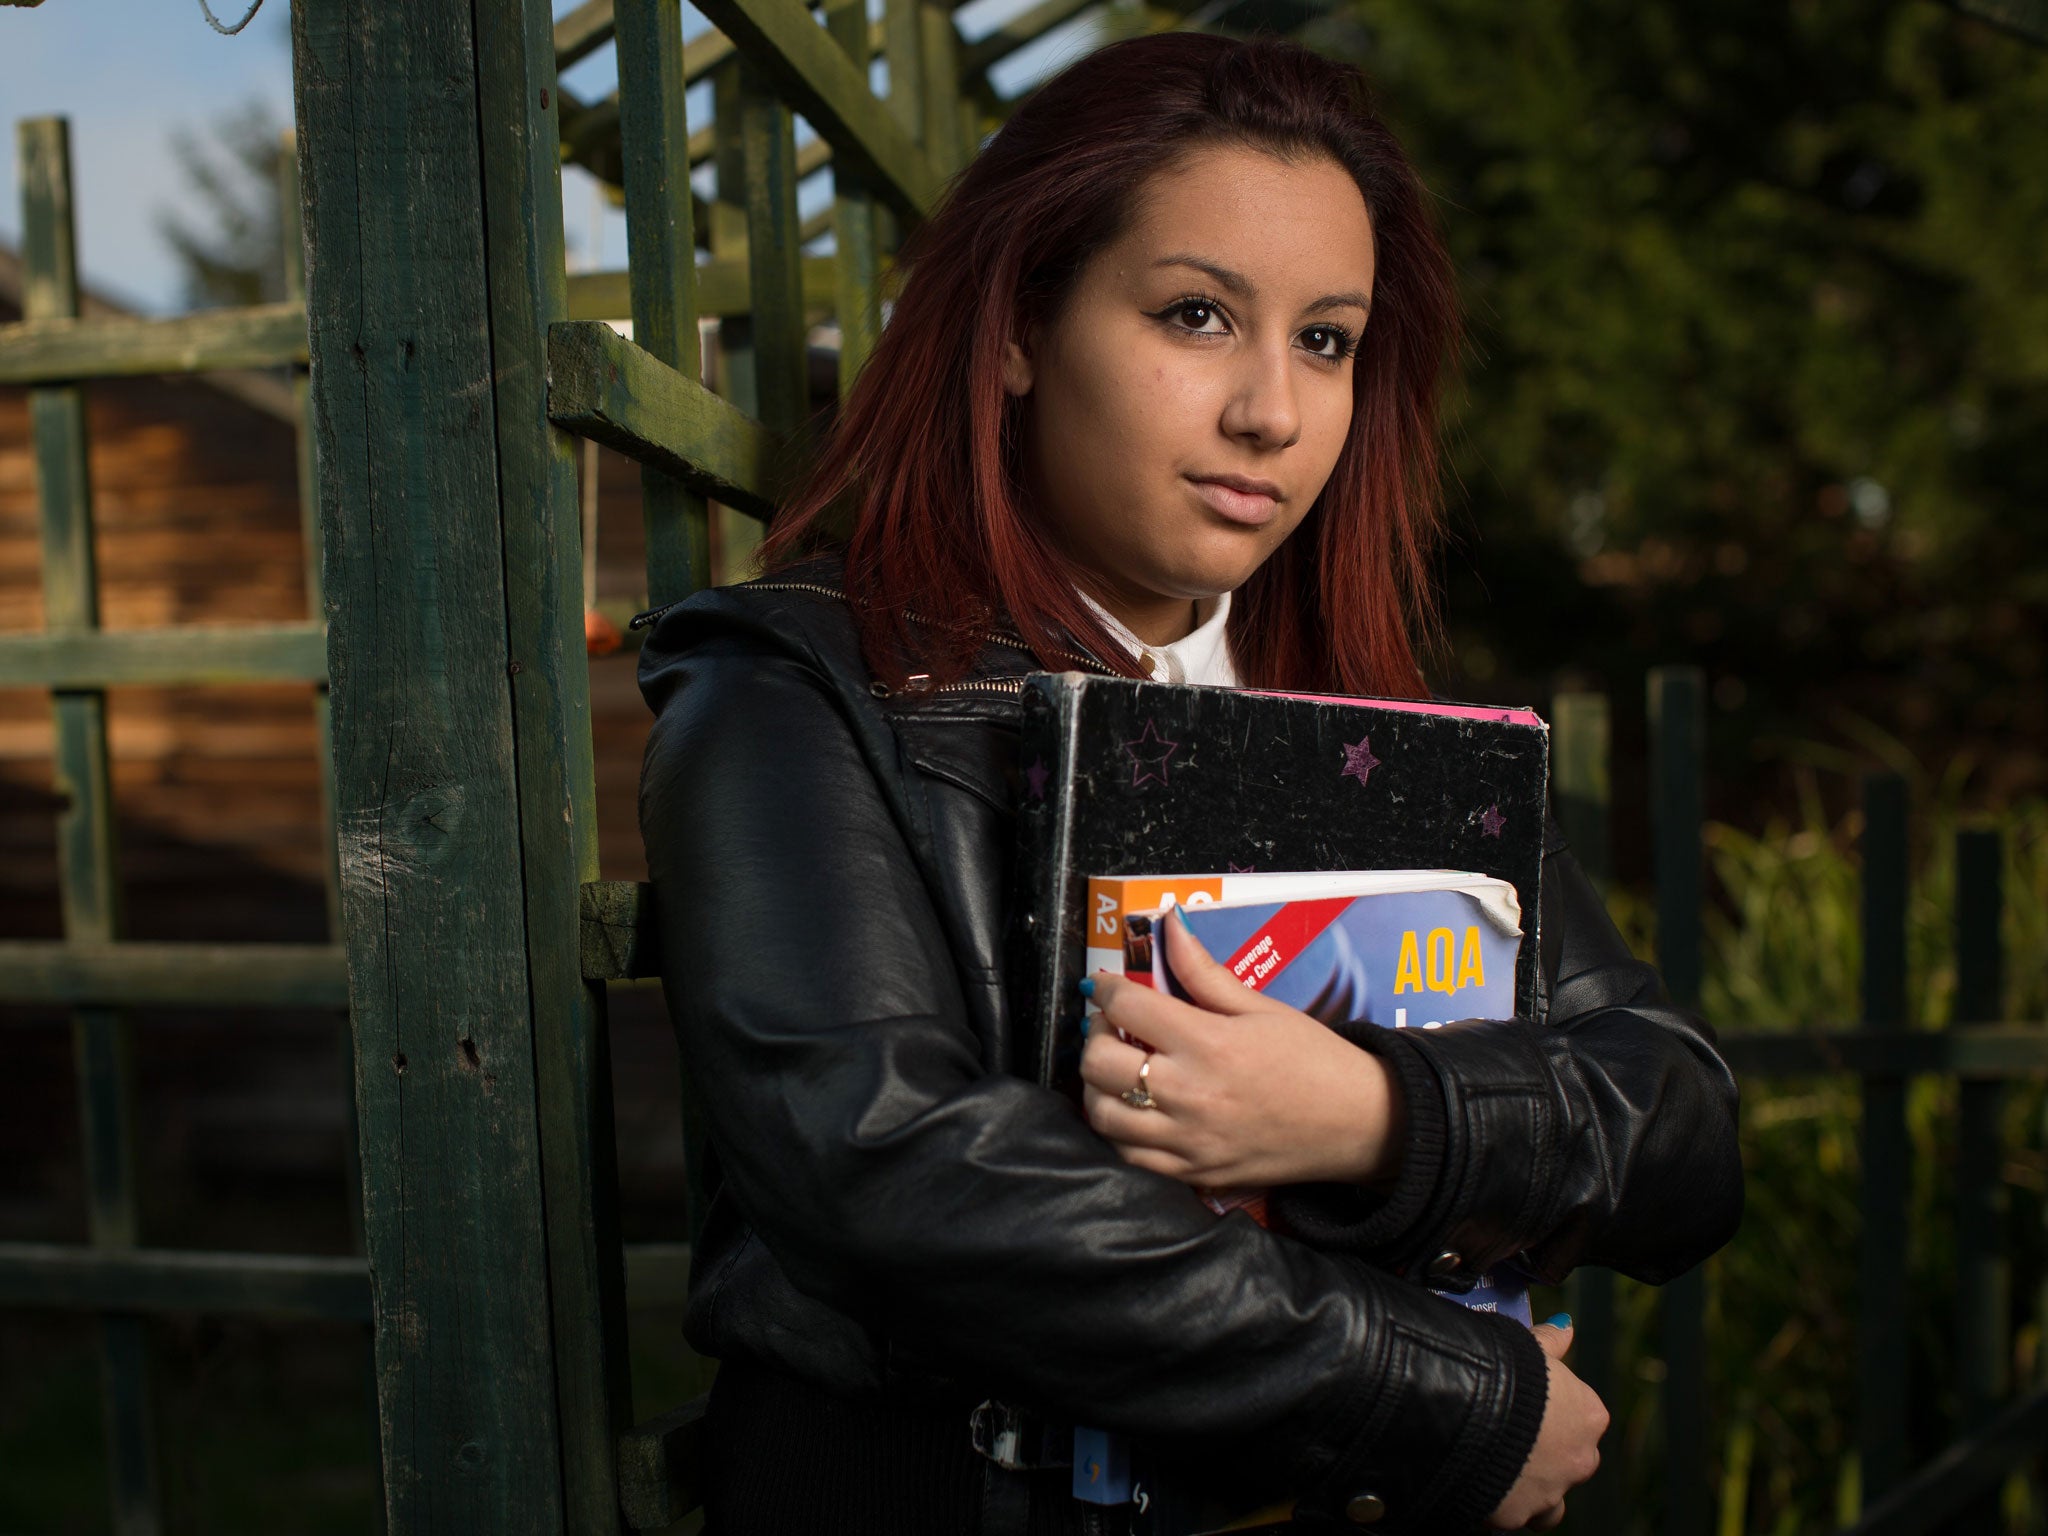 Tamara Hassan, 19, was put off by soaring student debt: 'By the time I came out of university, I would be in so much debt without any work experience and looking for a job that might have nothing to do with my degree, so I started looking at apprenticeshi